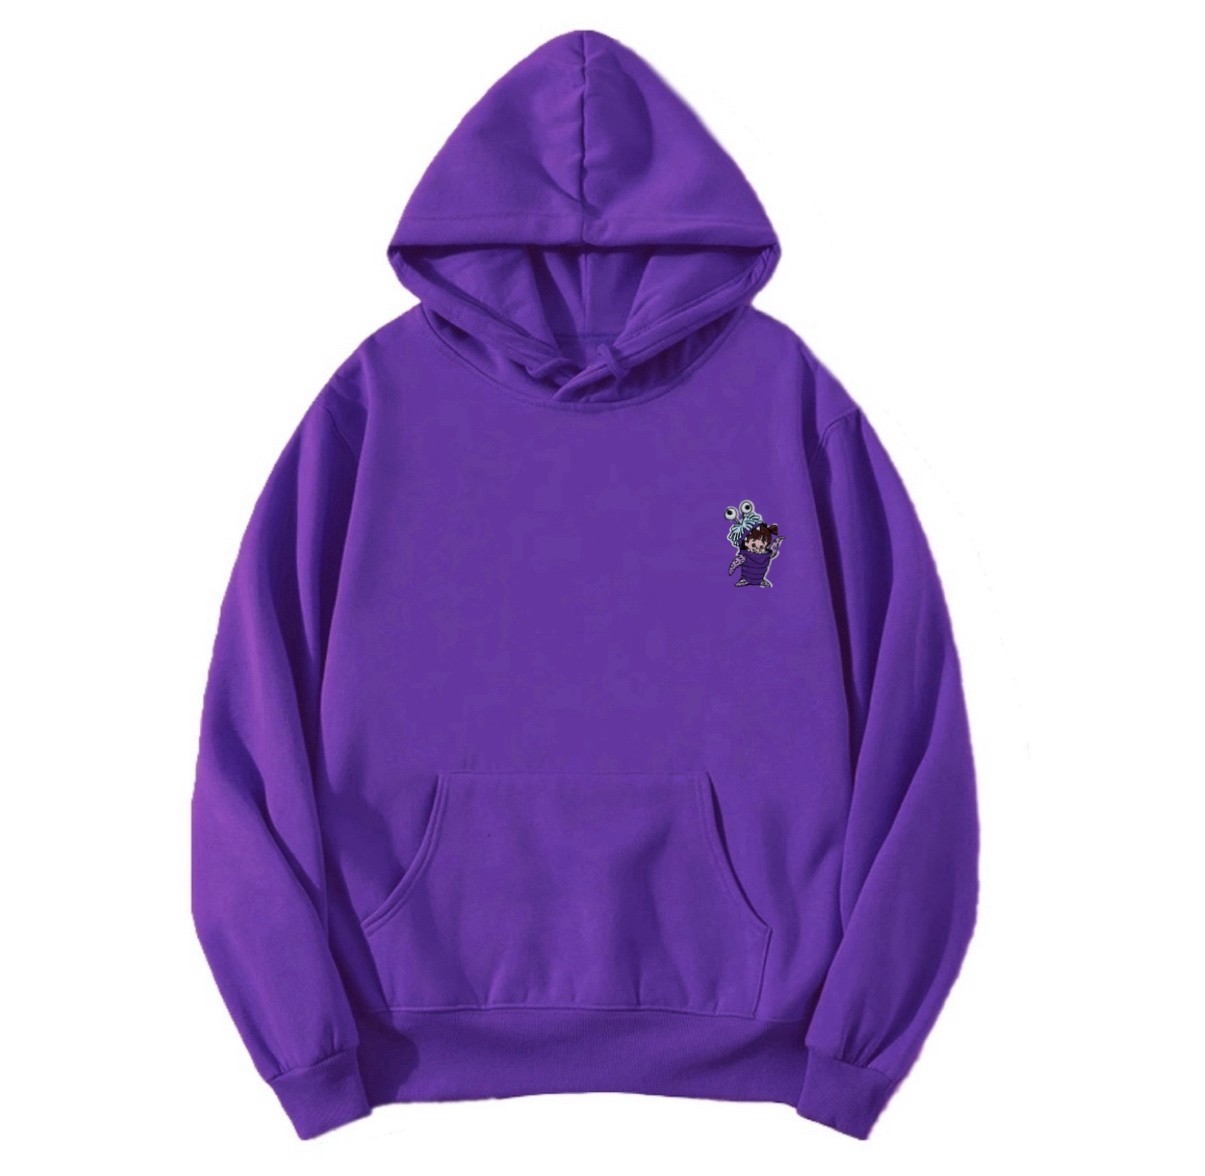 BOO patched regular fit purple hoodie 